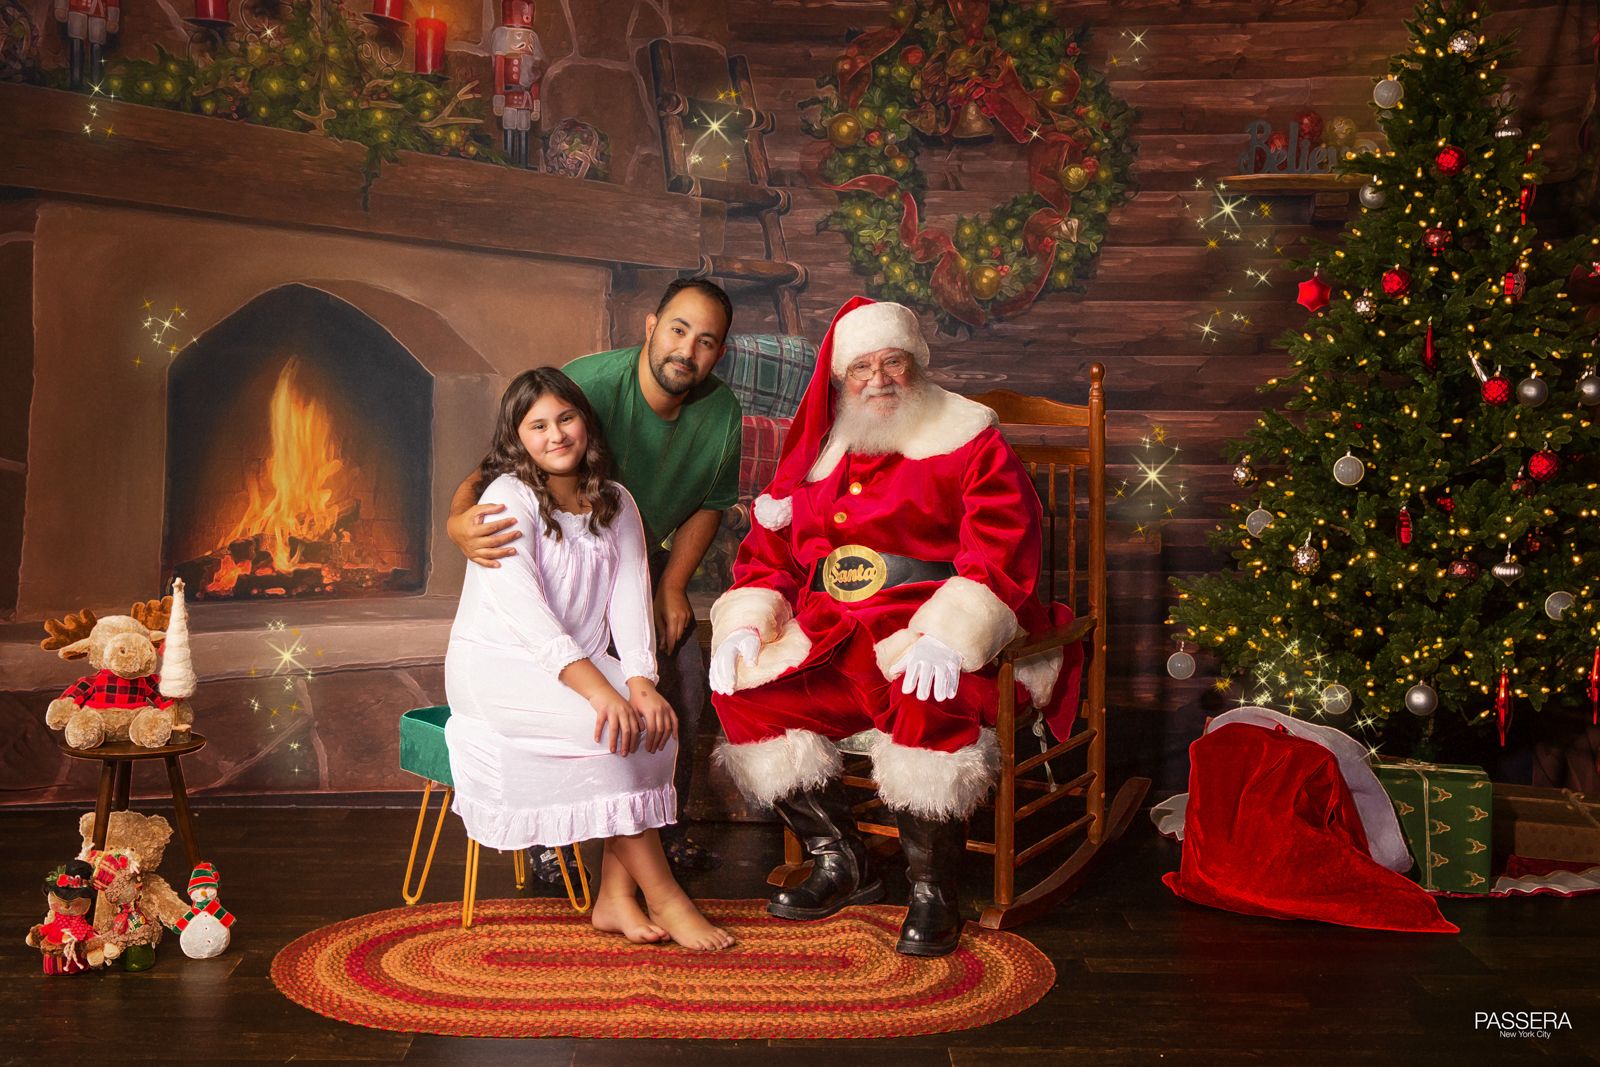 Father and daughter with Santa in a cozy seting with fireplace and Christmas tree in the background